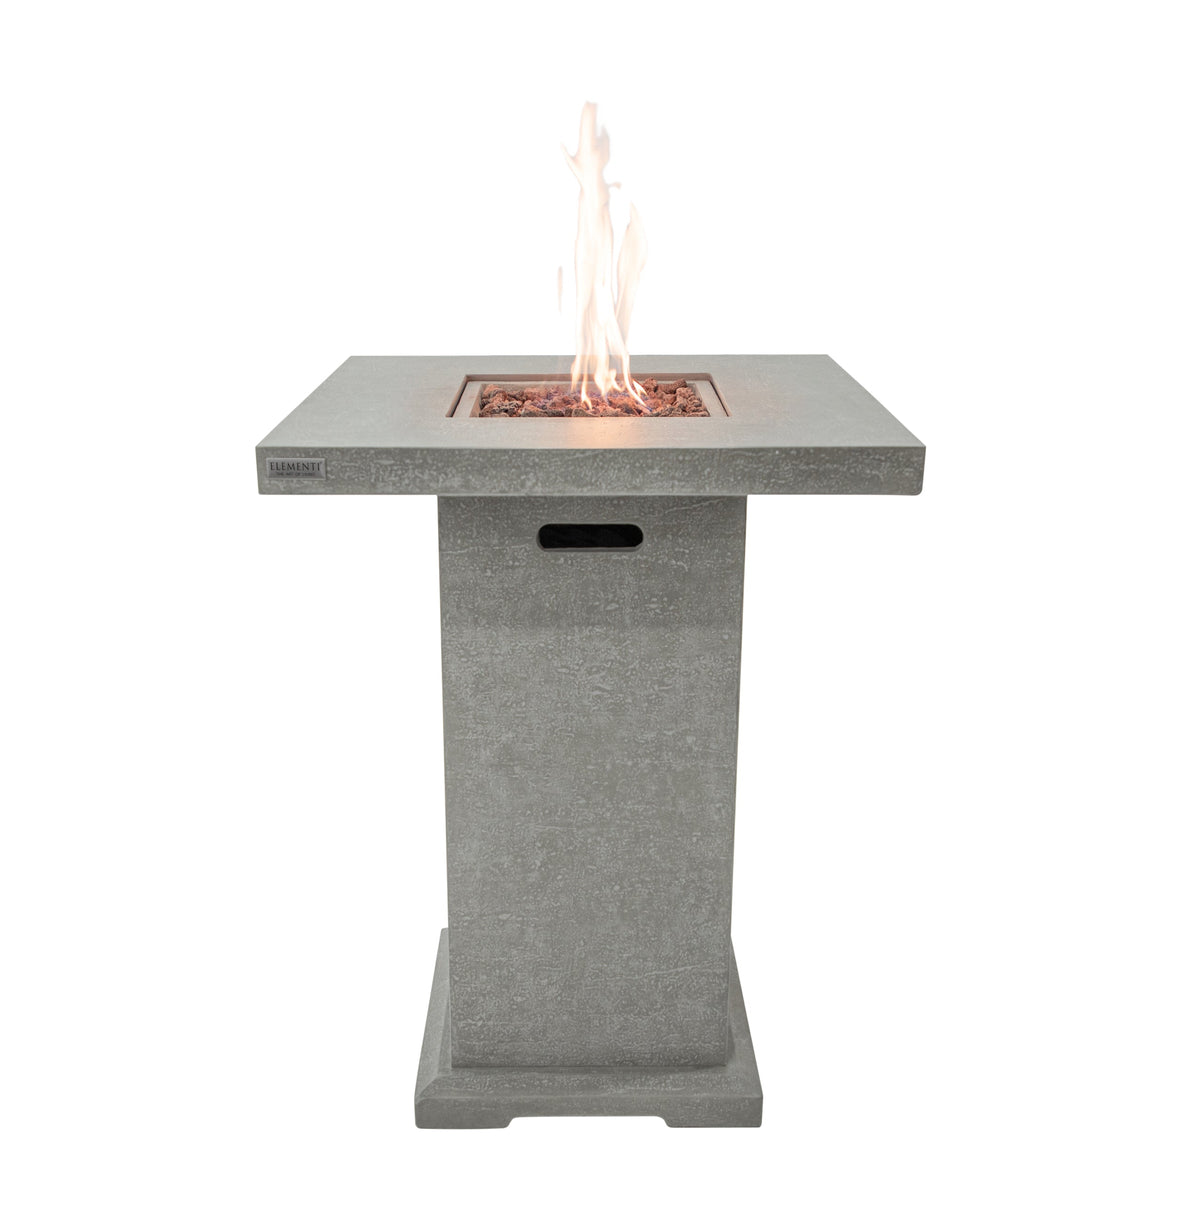 Elementi Montreal Bar Table in Light Gray lit